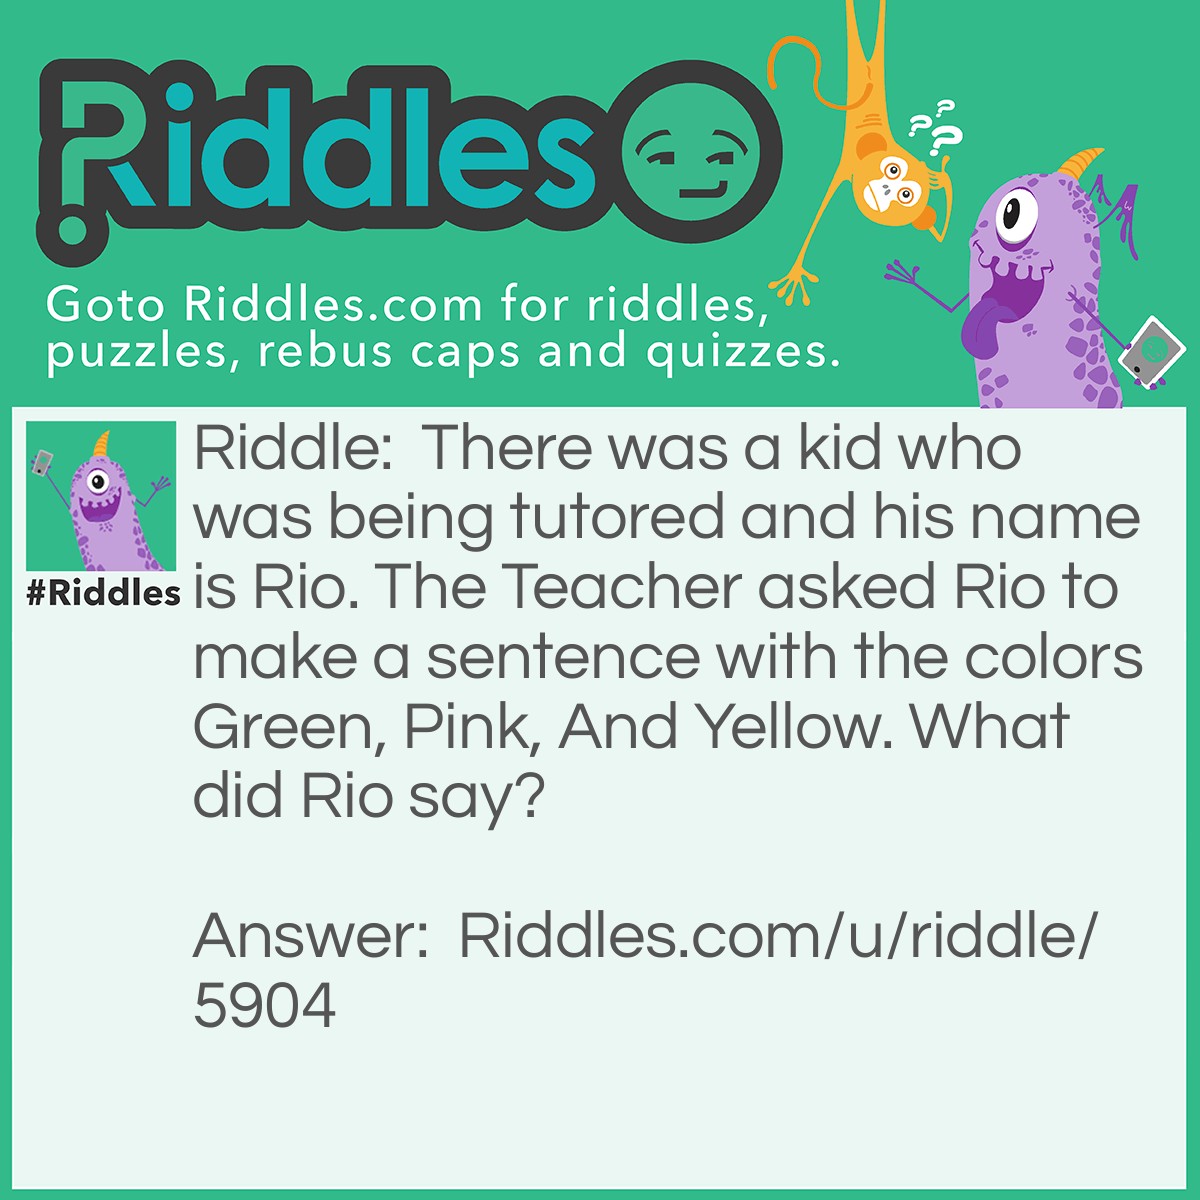 Riddle: There was a kid who was being tutored and his name is Rio. The Teacher asked Rio to make a sentence with the colors Green, Pink, And Yellow. What did Rio say? Answer: He Said: Green Green I Pink Up The Phone and say Yellow Yellow.